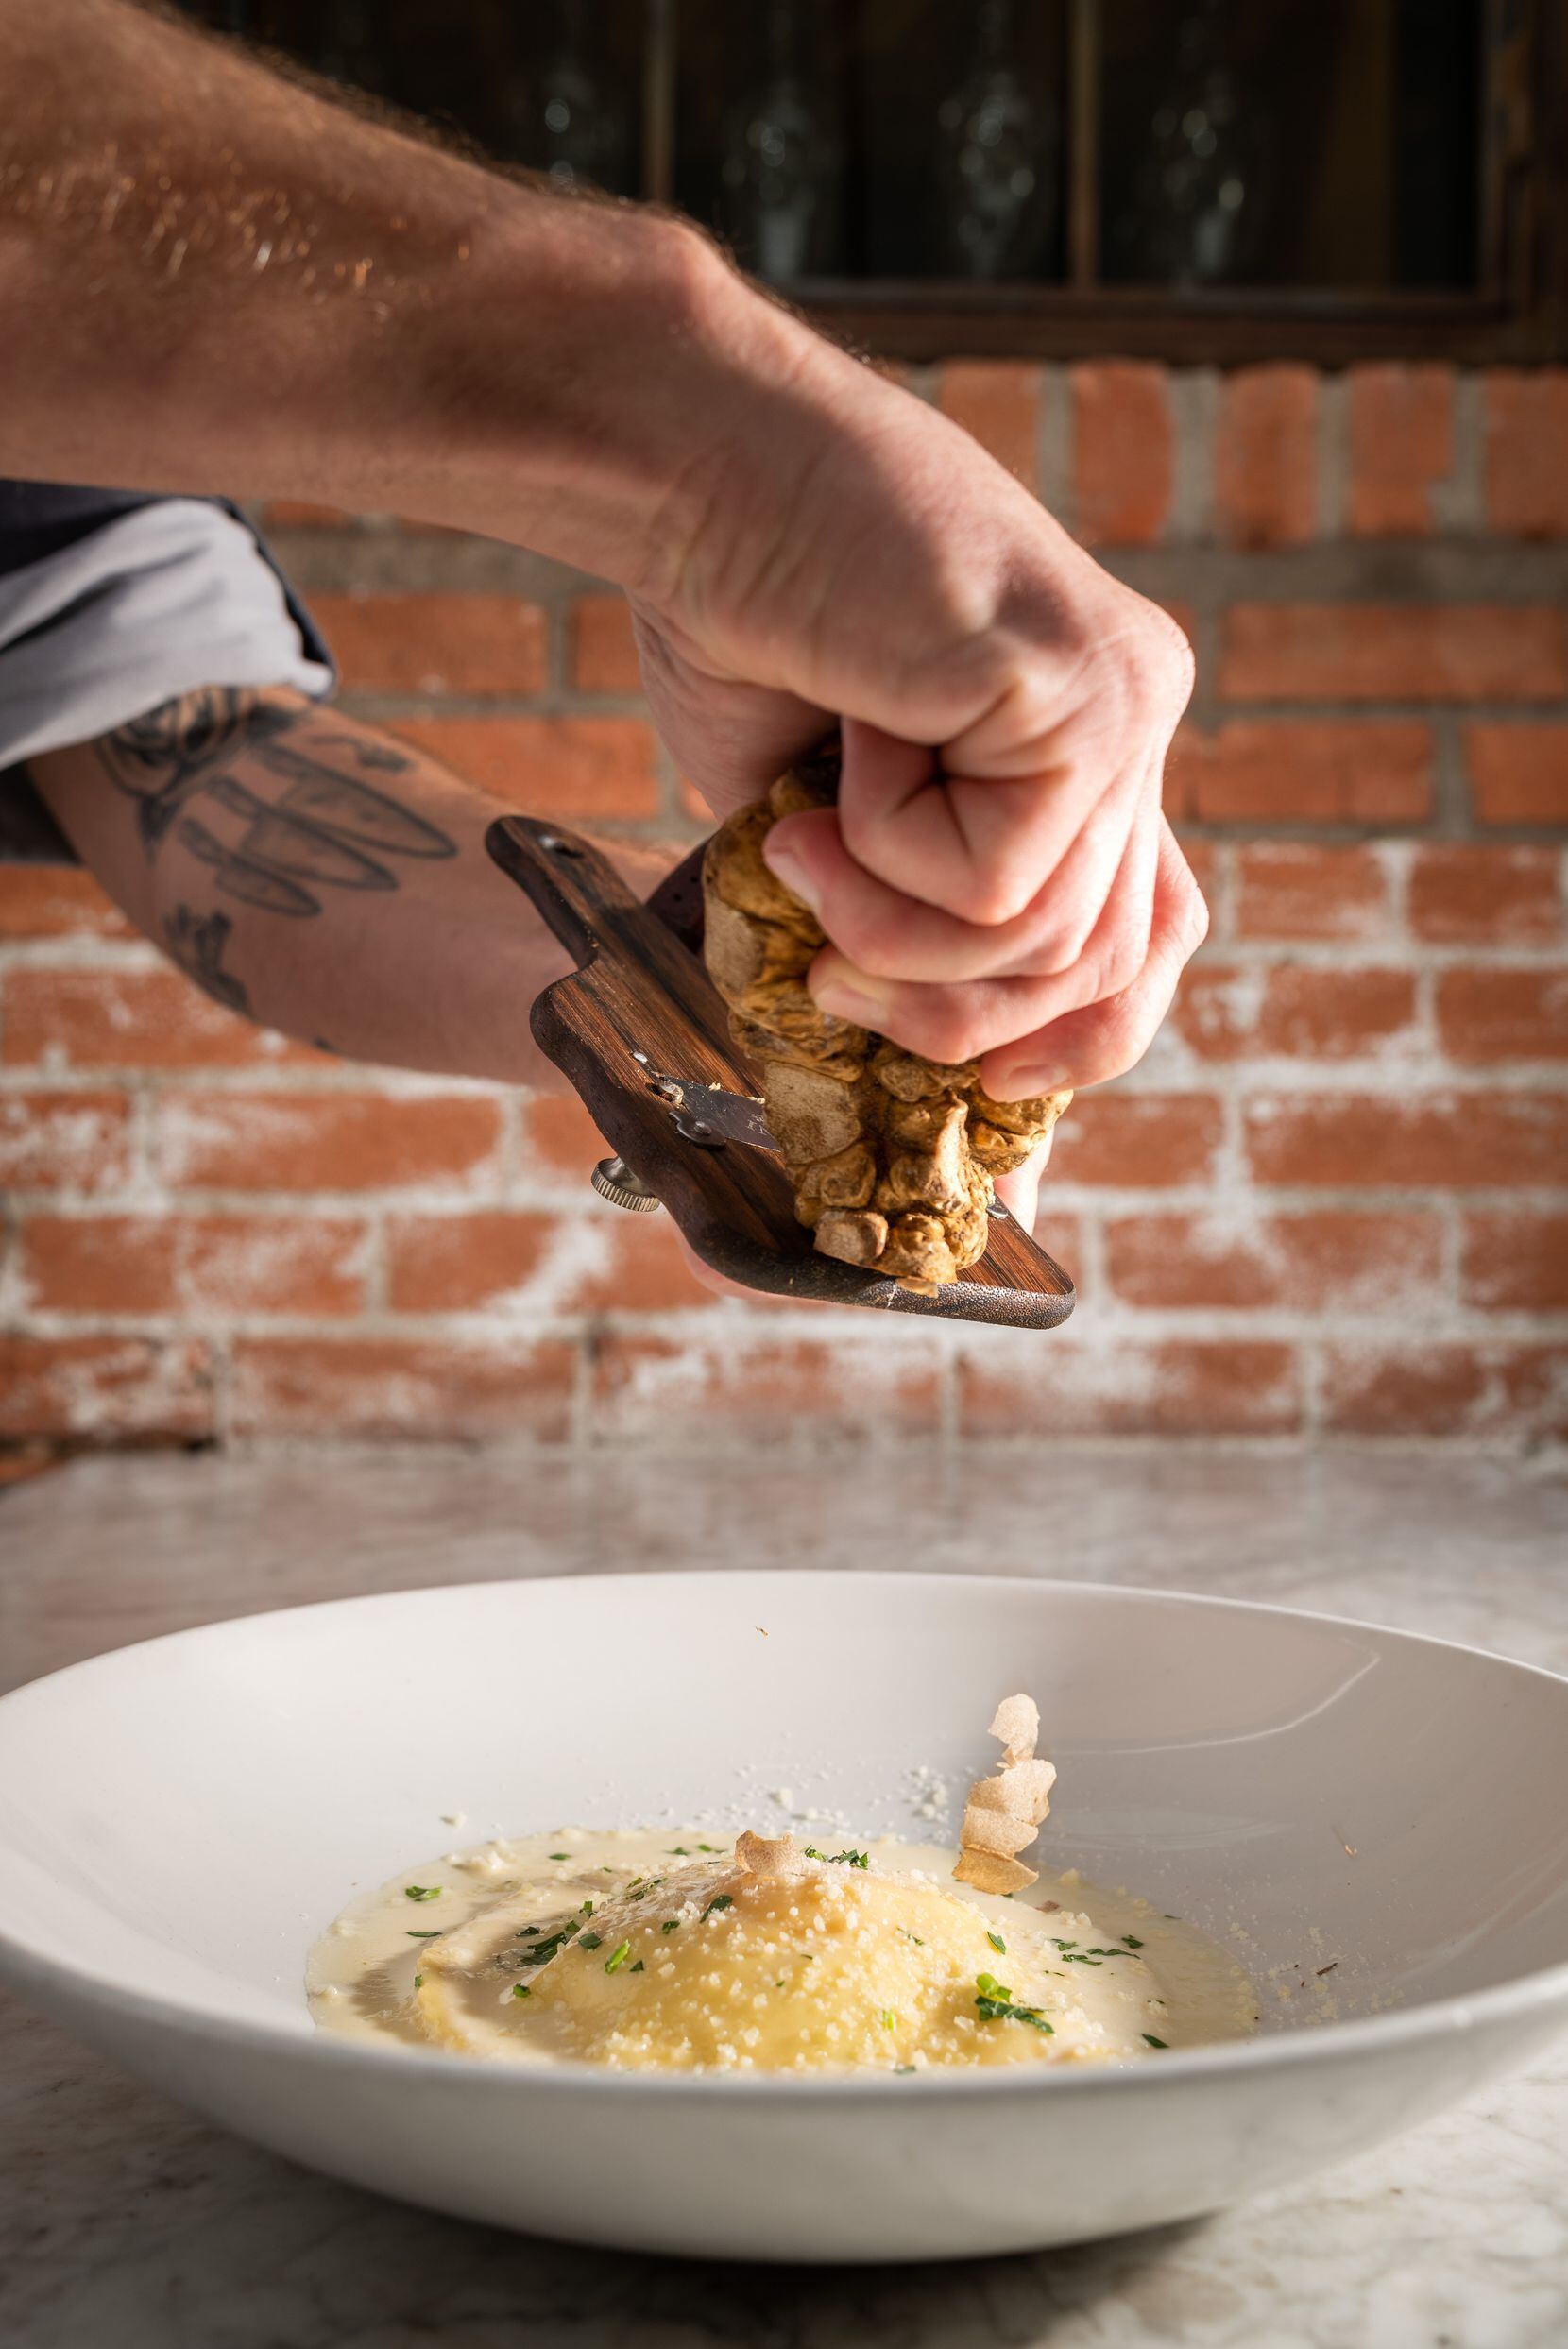 Corporate Chef Ty Thaxton adds finishing touches to a dish of white truffle raviolo with ricotta cheese and egg yolk filling from the coming-soon Frisco restaurant Lombardi Cucina Italiana.